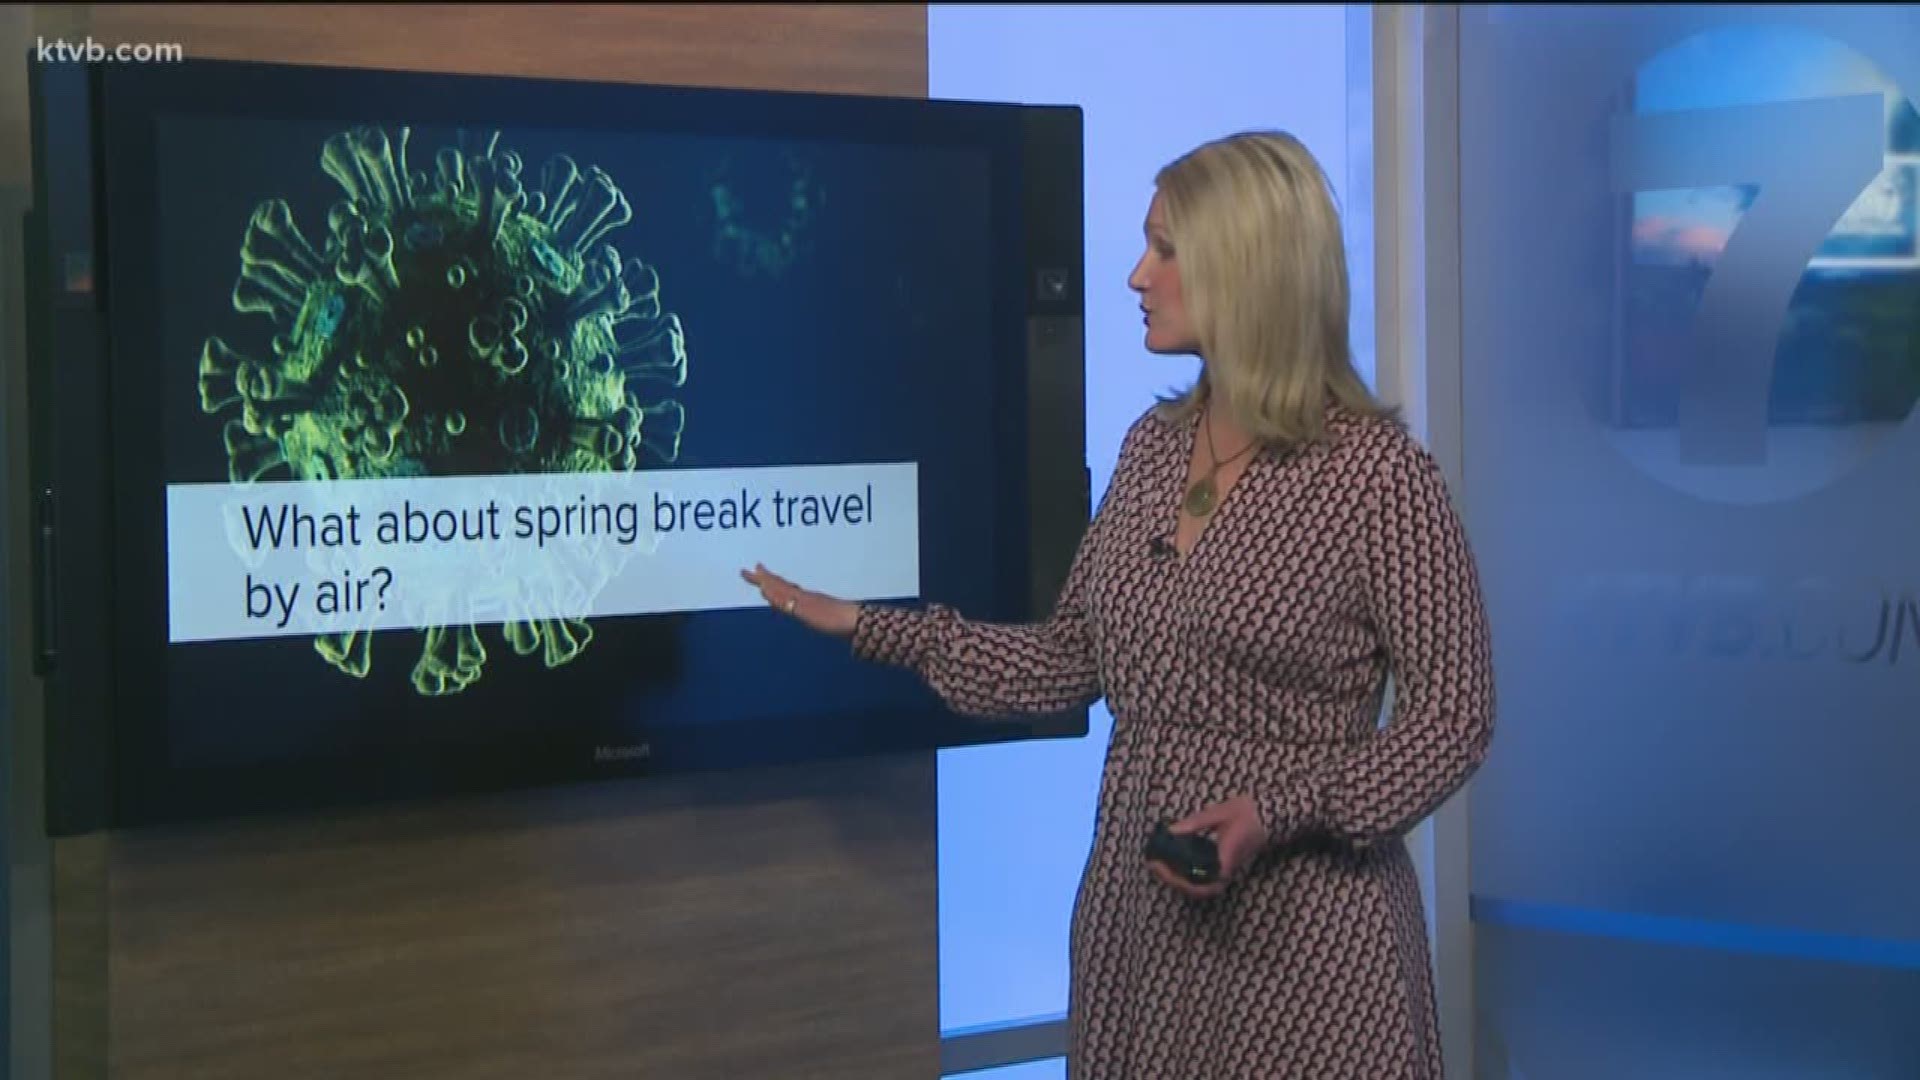 KTVB's Tami Tremblay provides answers from experts to commonly-asked questions about the spread of coronavirus in the United States.